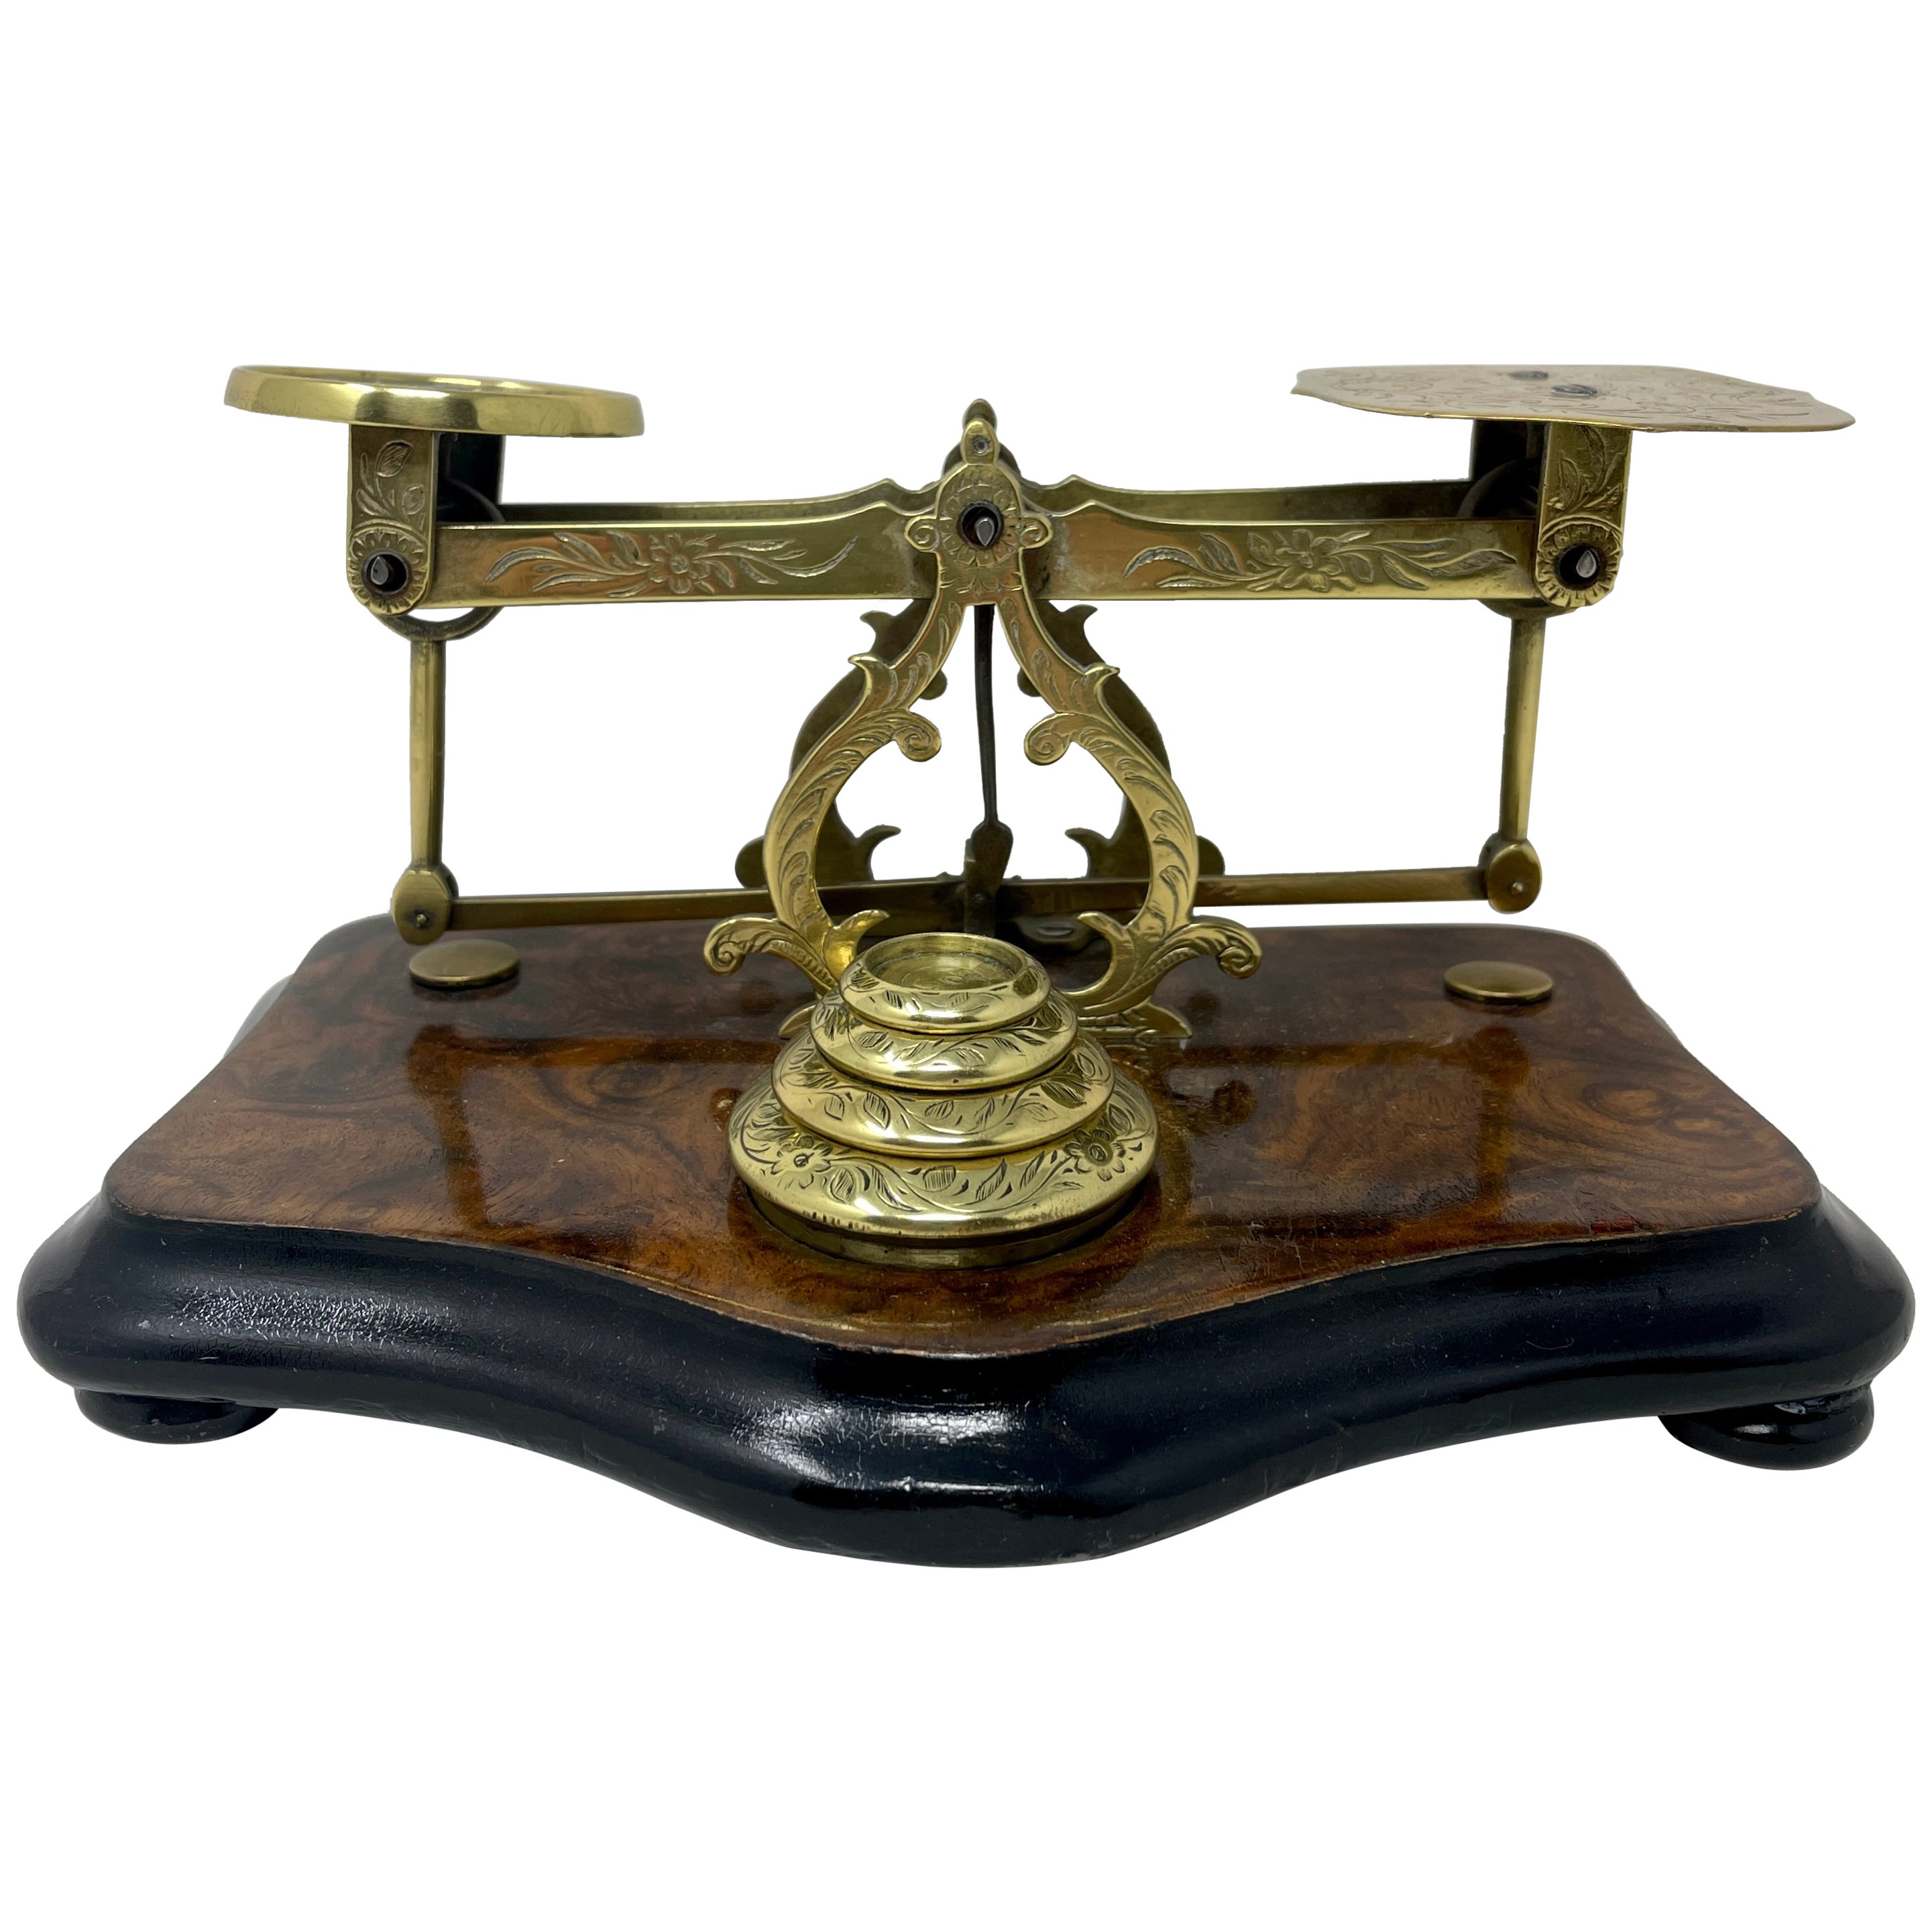 Antique English Walnut and Brass Engraved Postal Scale, Circa 1860